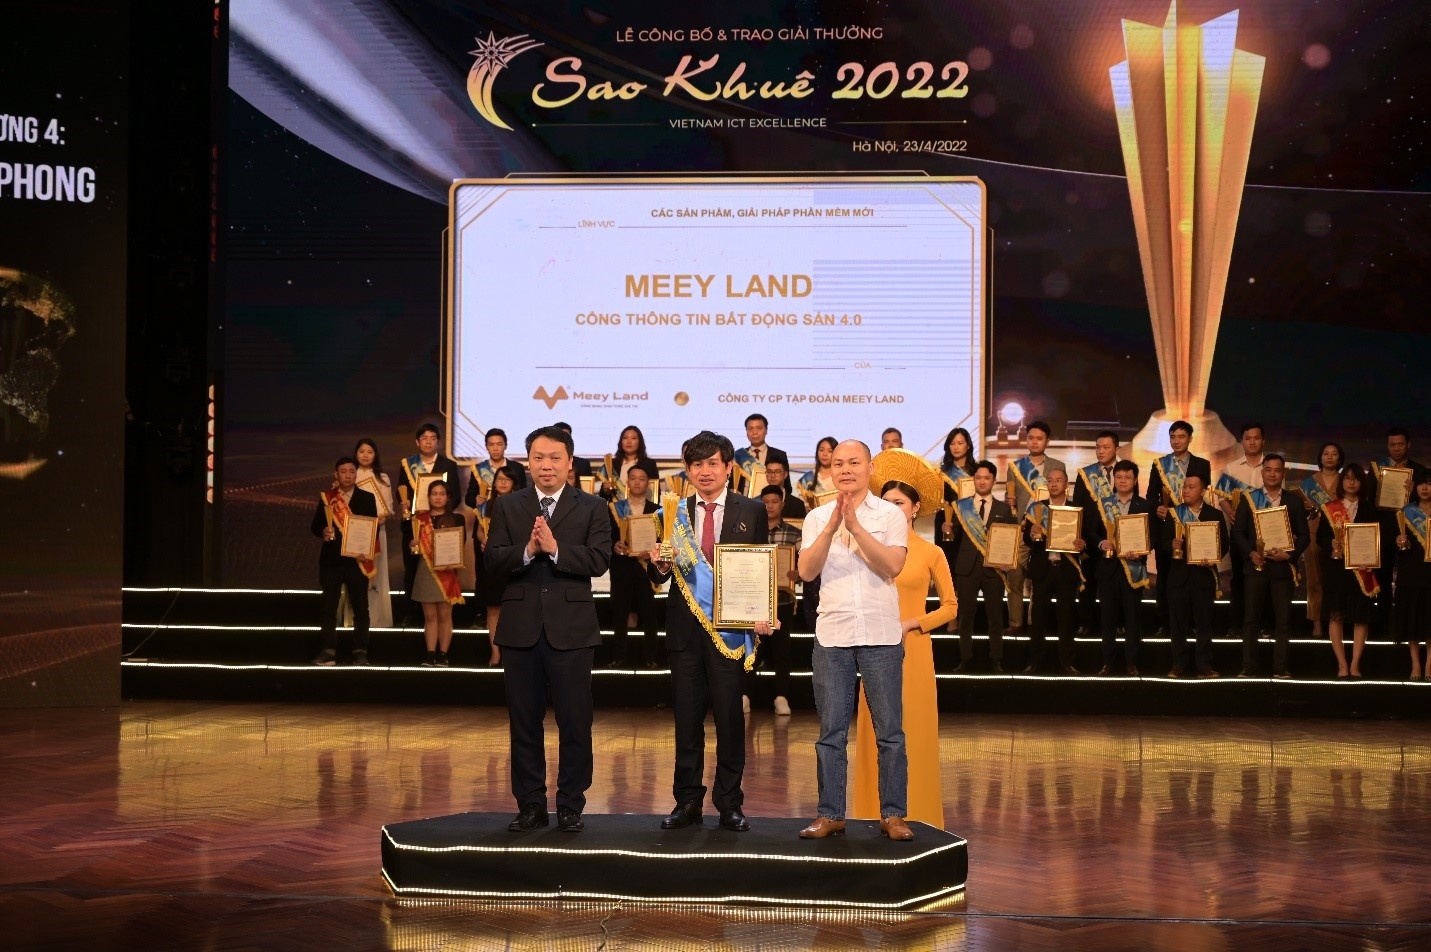 Meey Land named as the winner of the Sao Khue Awards